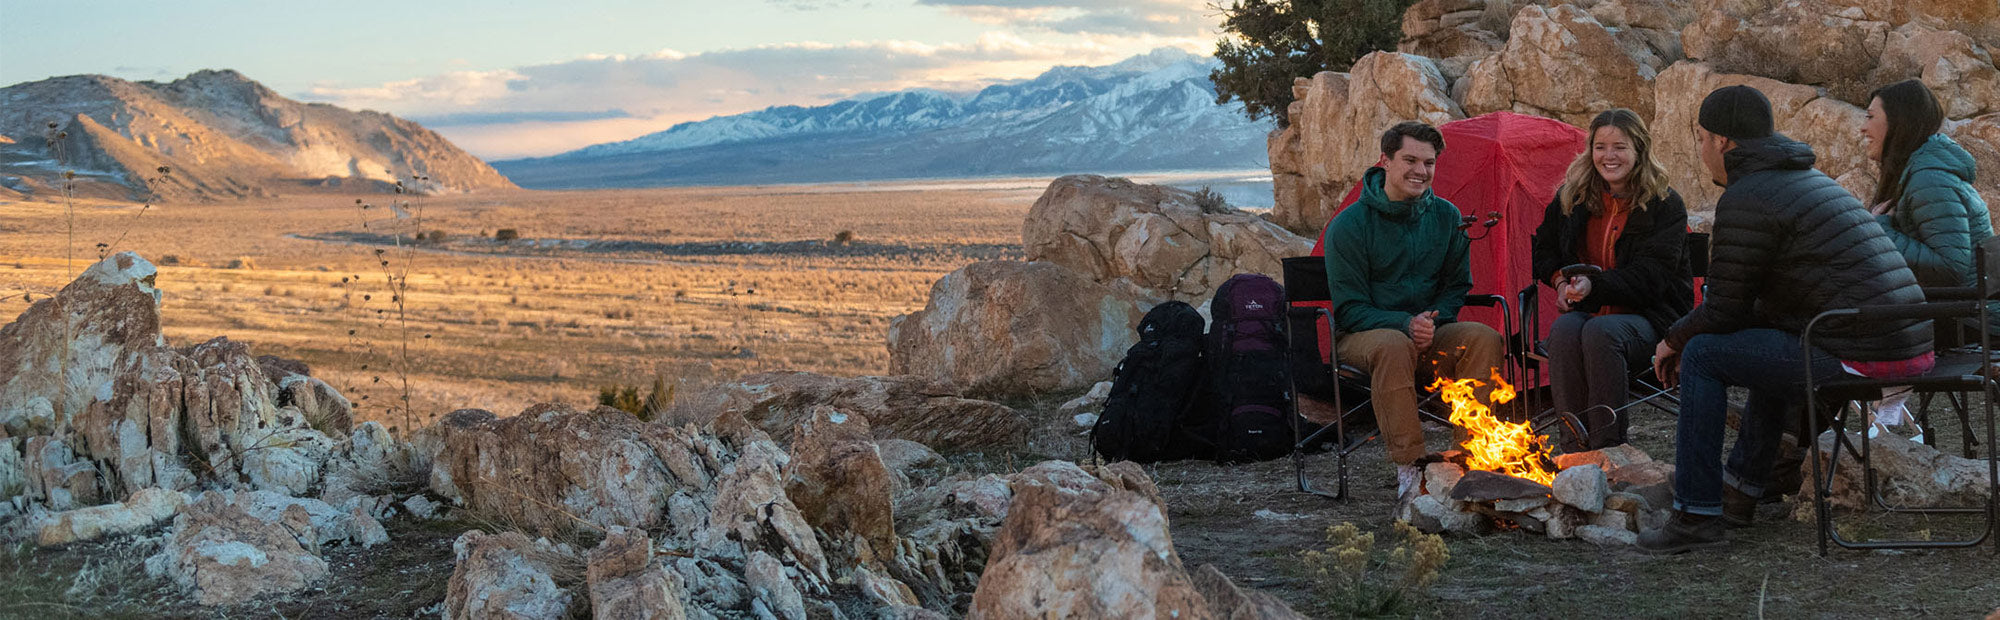 TETON: Quality Outdoor Camping & Hiking Gear at the Best Prices